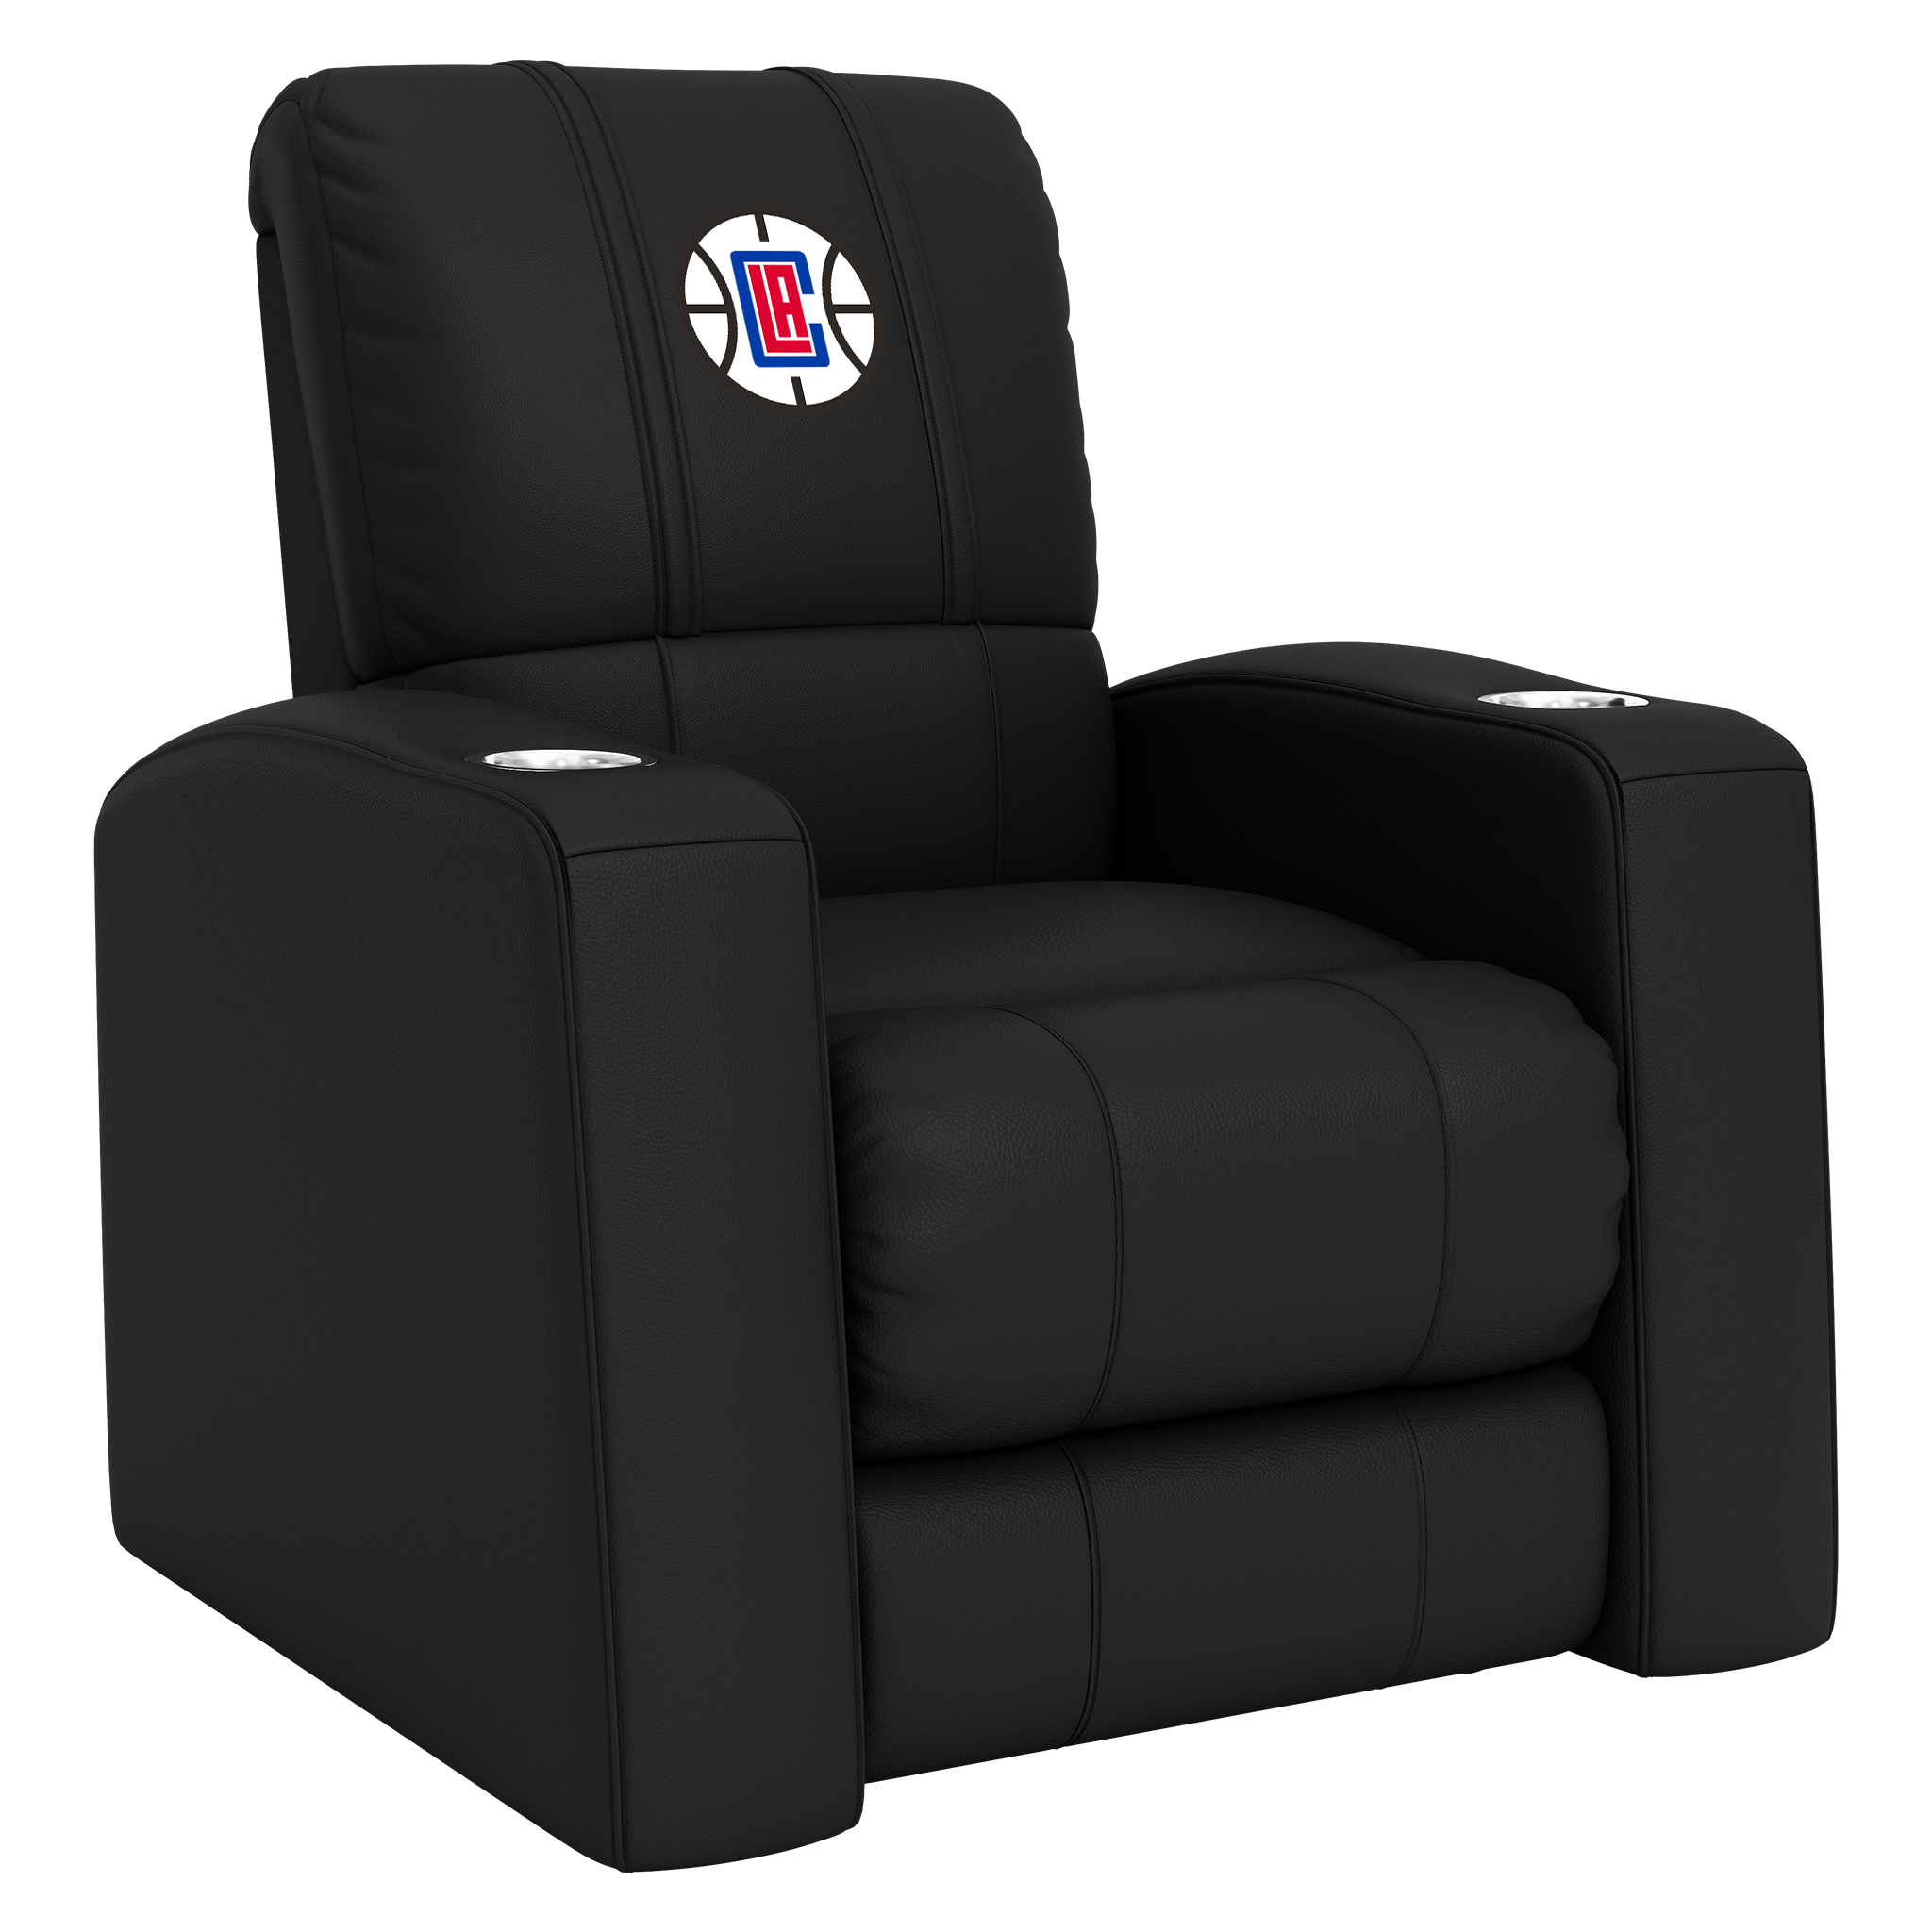 Los Angeles Clippers Home Theater Recliner with Los Angeles Clippers Primary